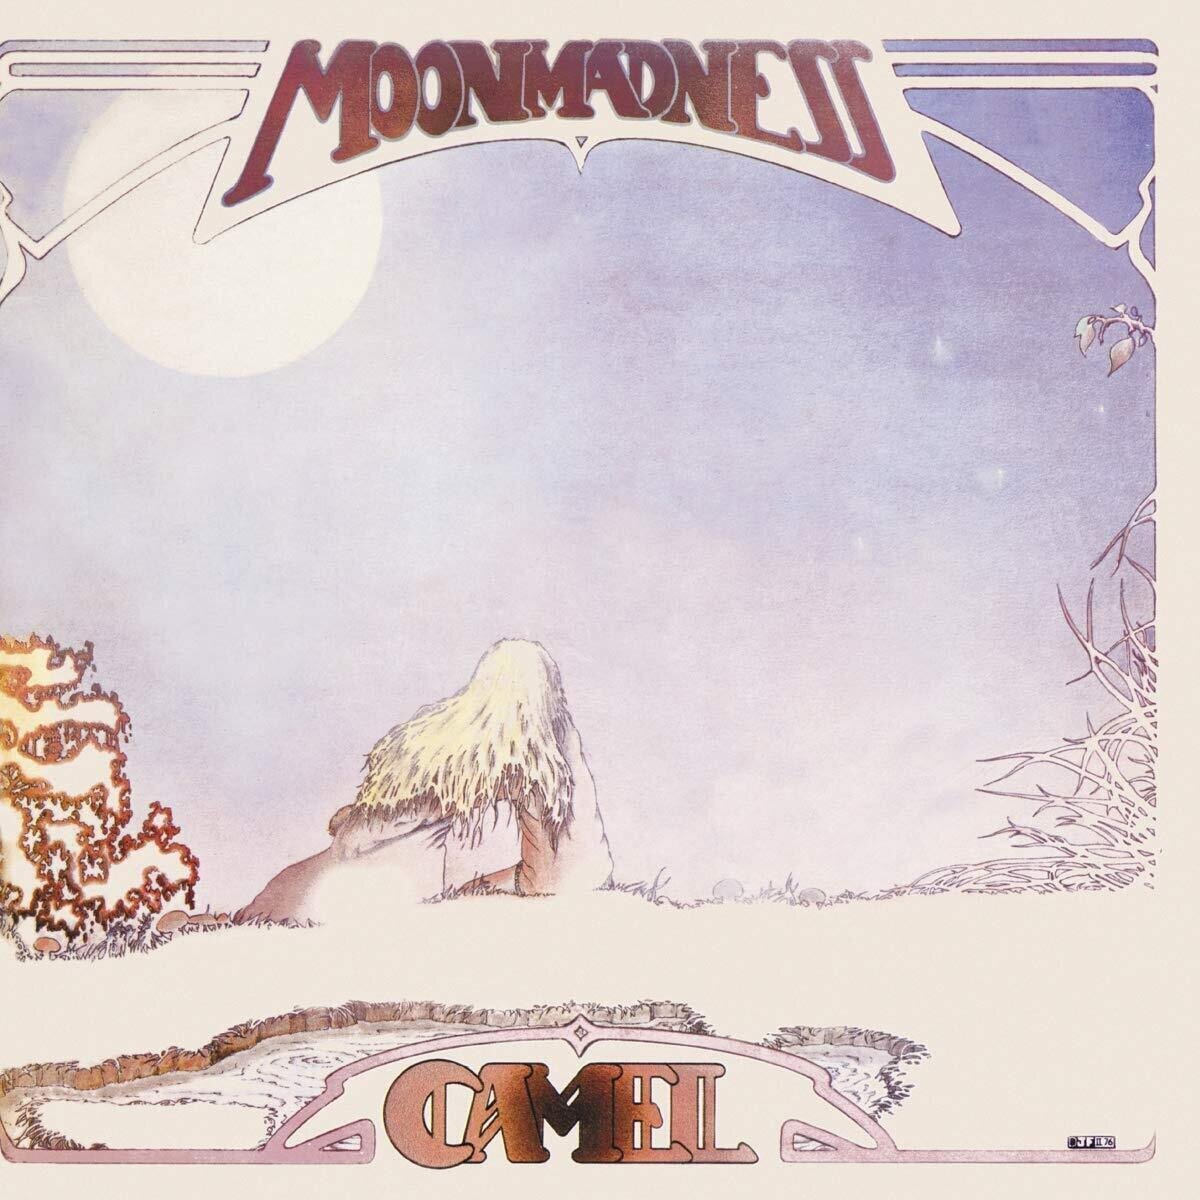 Camel - Moonmadness (Remastered) (LP)